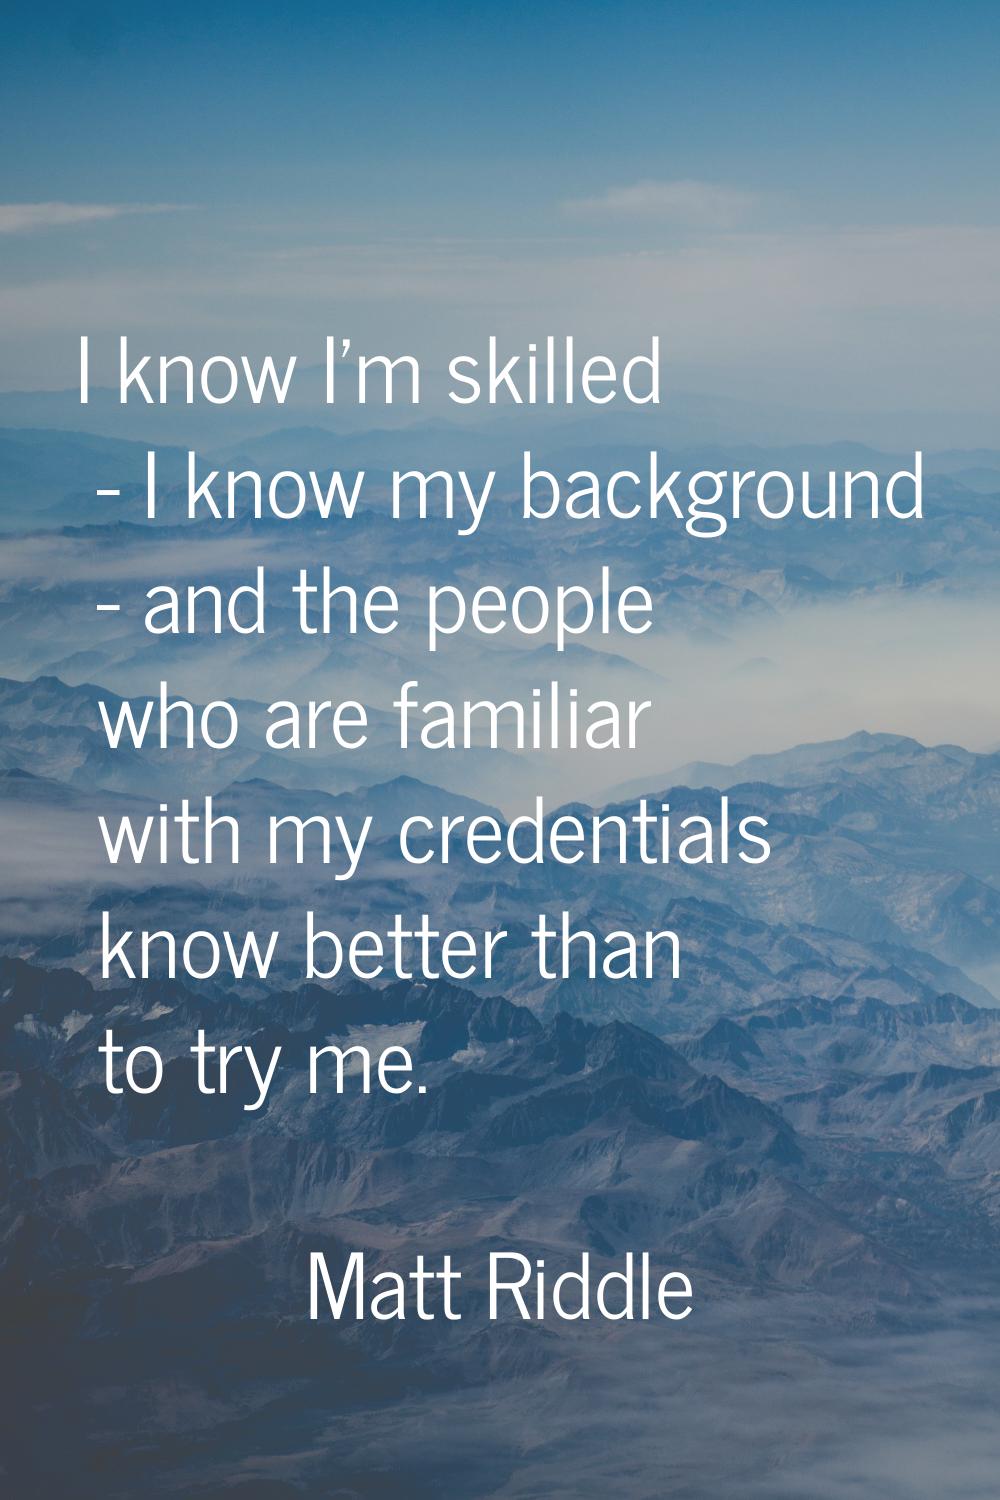 I know I'm skilled - I know my background - and the people who are familiar with my credentials kno